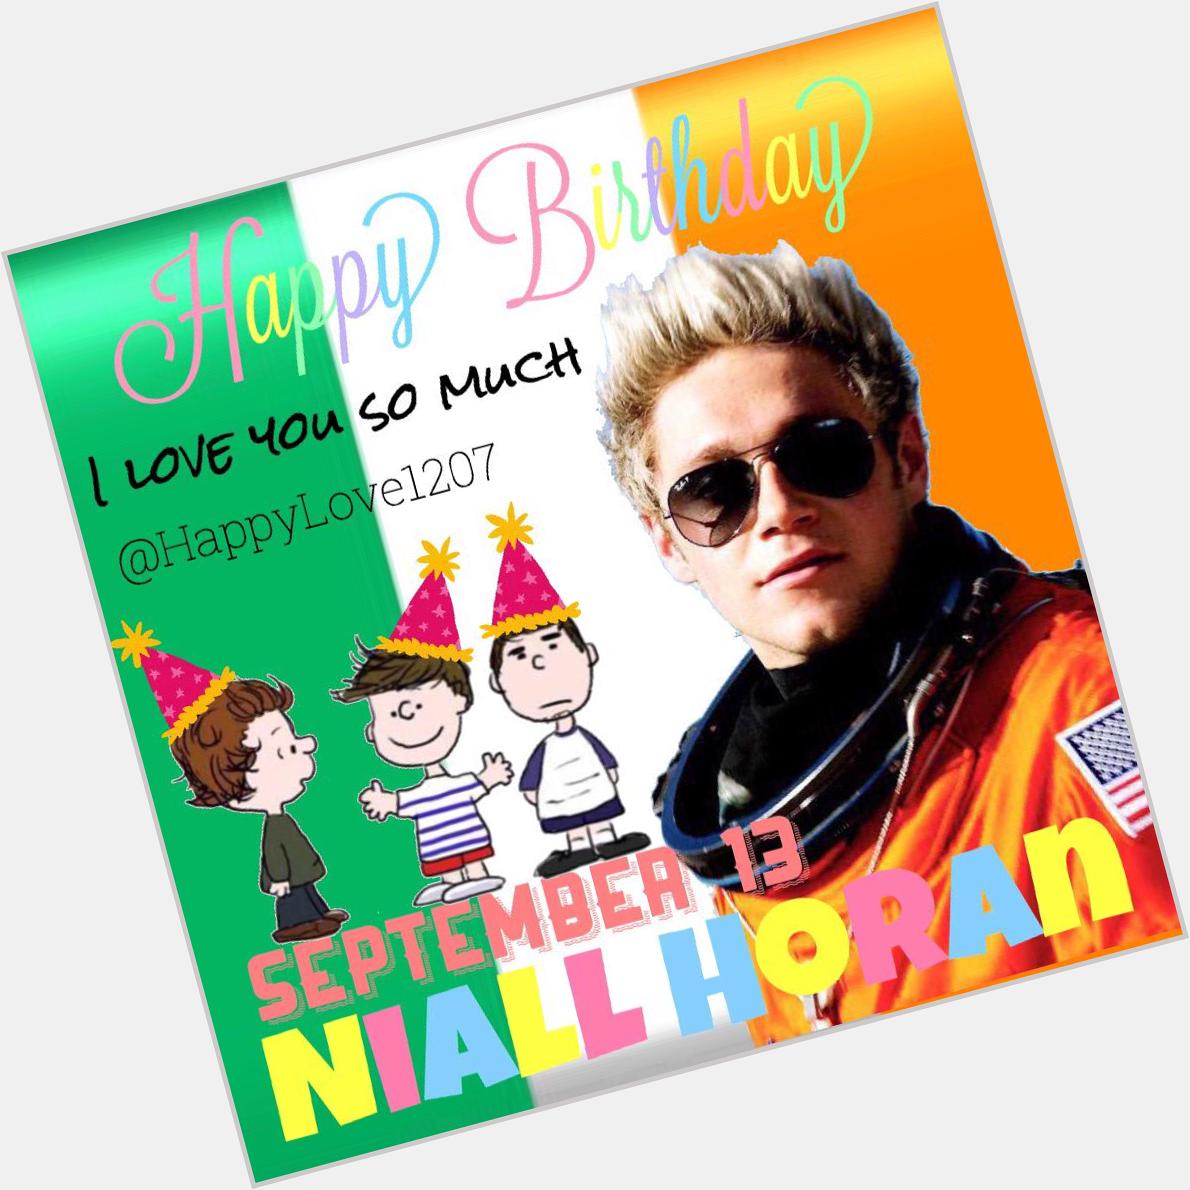  Happy Birthday  Niall Horan I love you so much  As fracture will heal quickly   